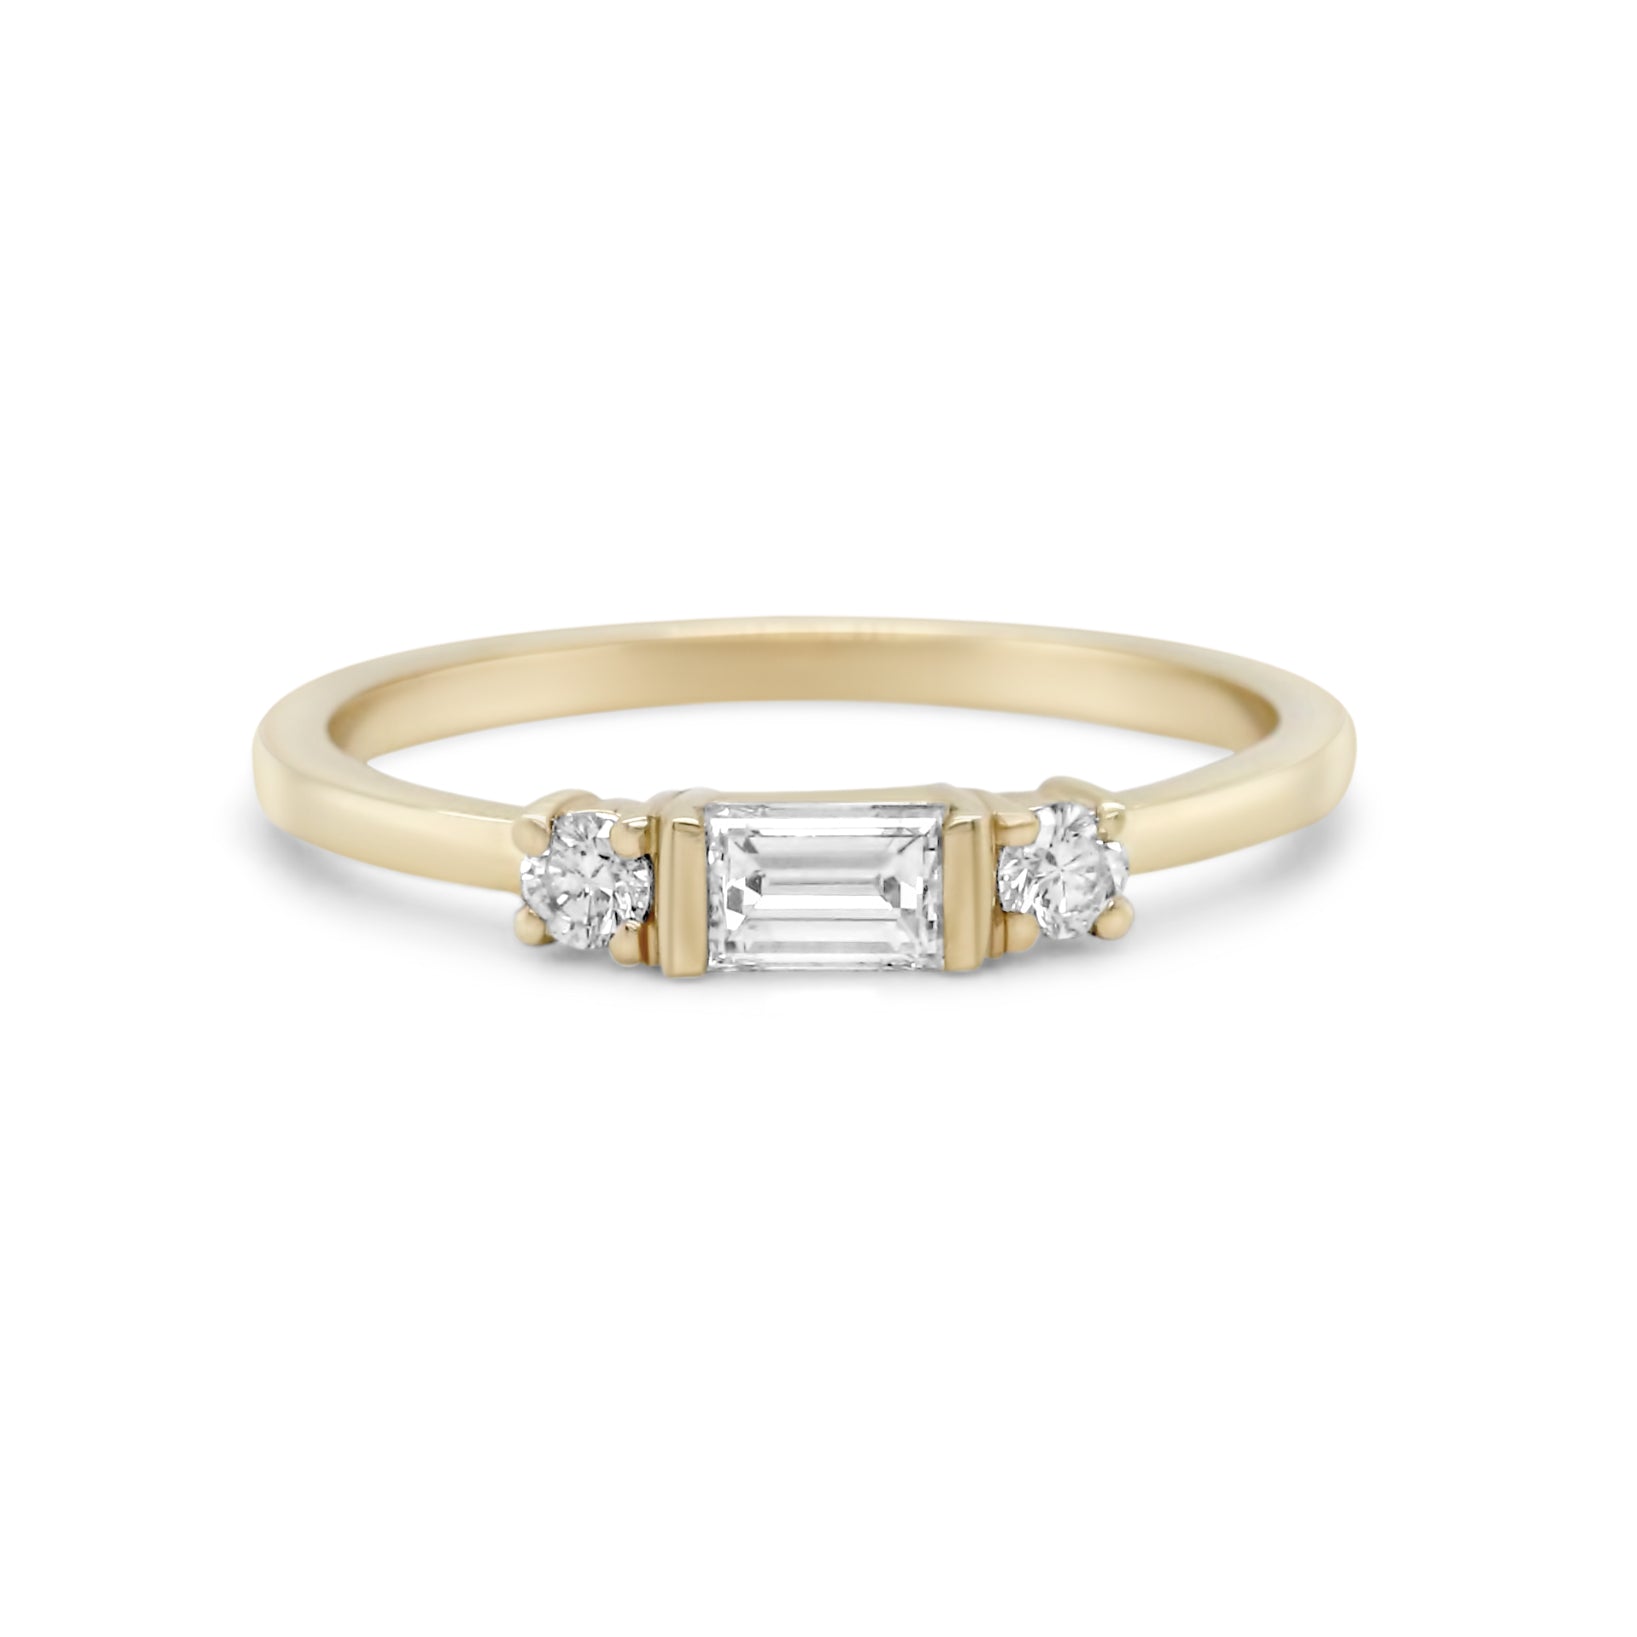 14k yellow gold diamond baguette center stone with round cut side stones